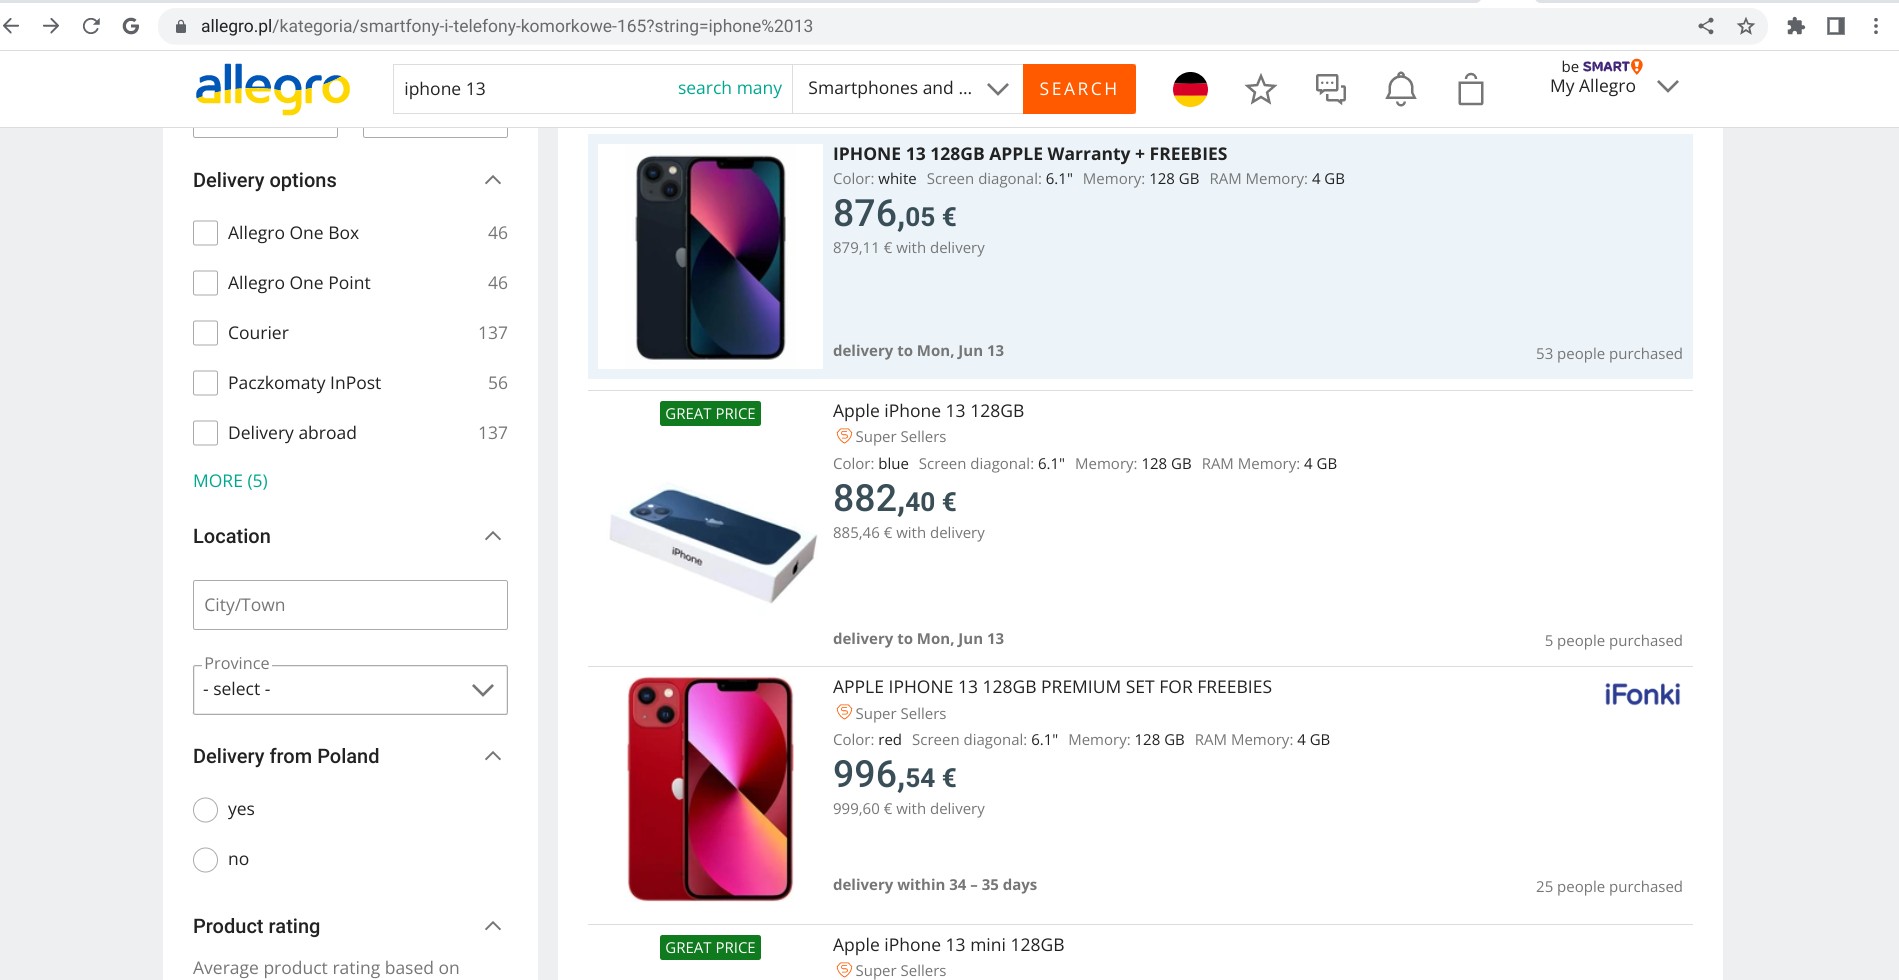 Screenshot of allegro.pl displaying iPhone 13 product listings by different sellers